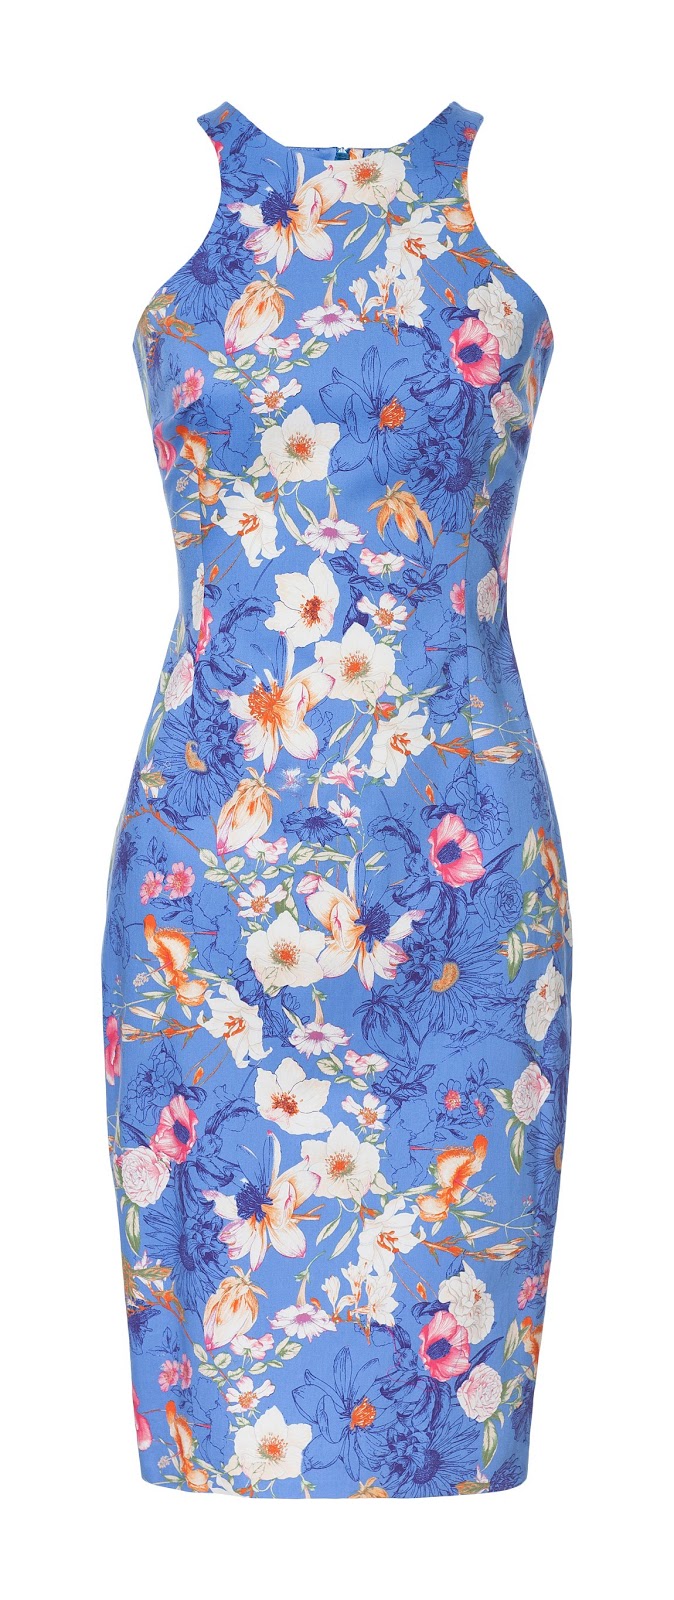 ZARA NEW COLLECTION 2013. DIVINE FLORAL PRINTED RACER DRESS. BLOGGERS ...